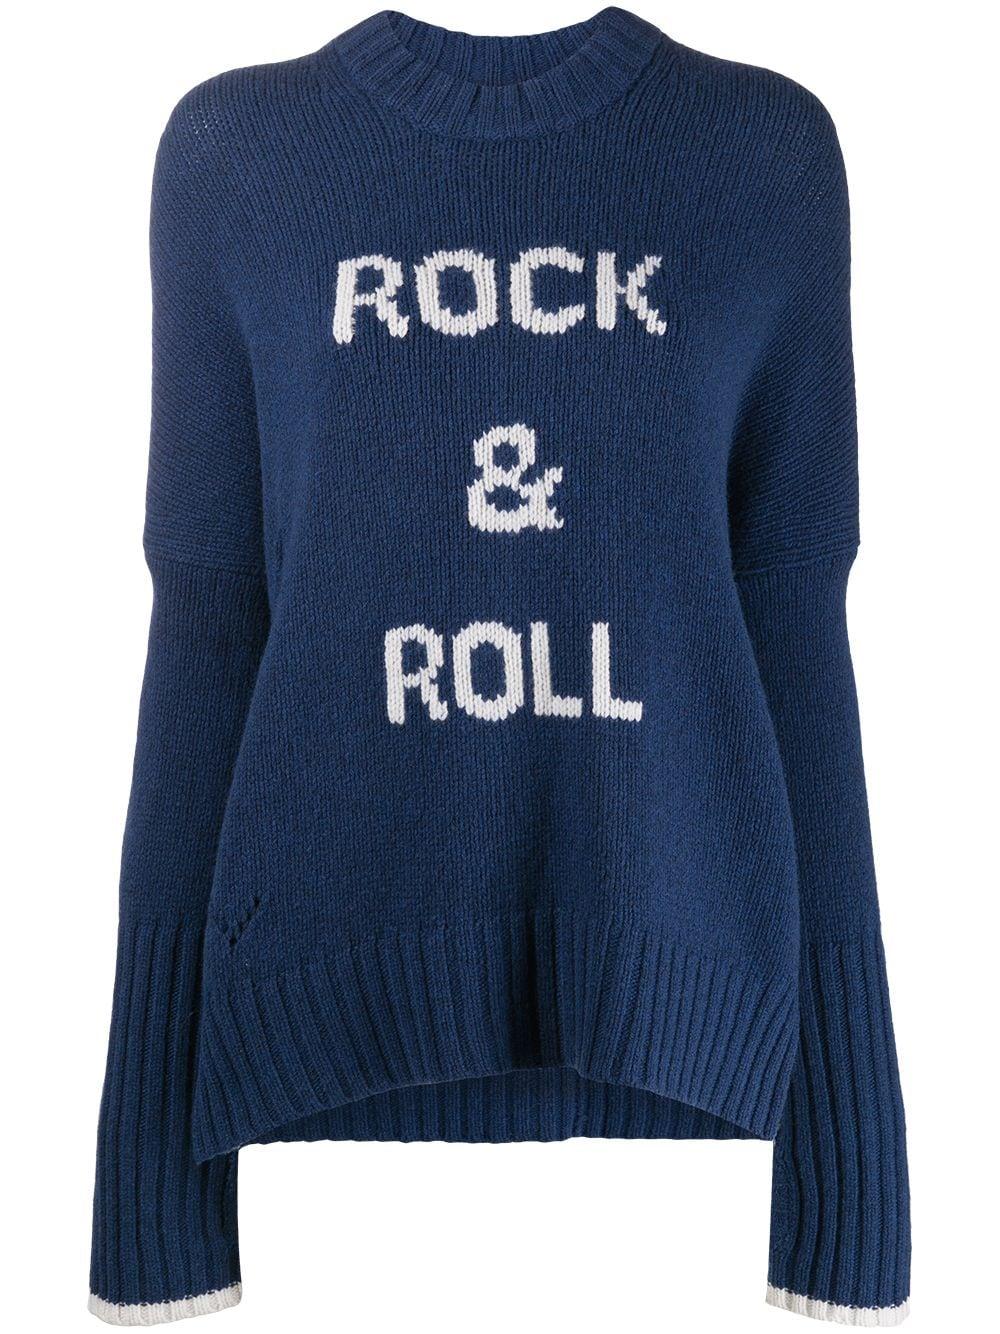 Zadig & Voltaire Rock & Roll Knit Jumper in Blue - Lyst